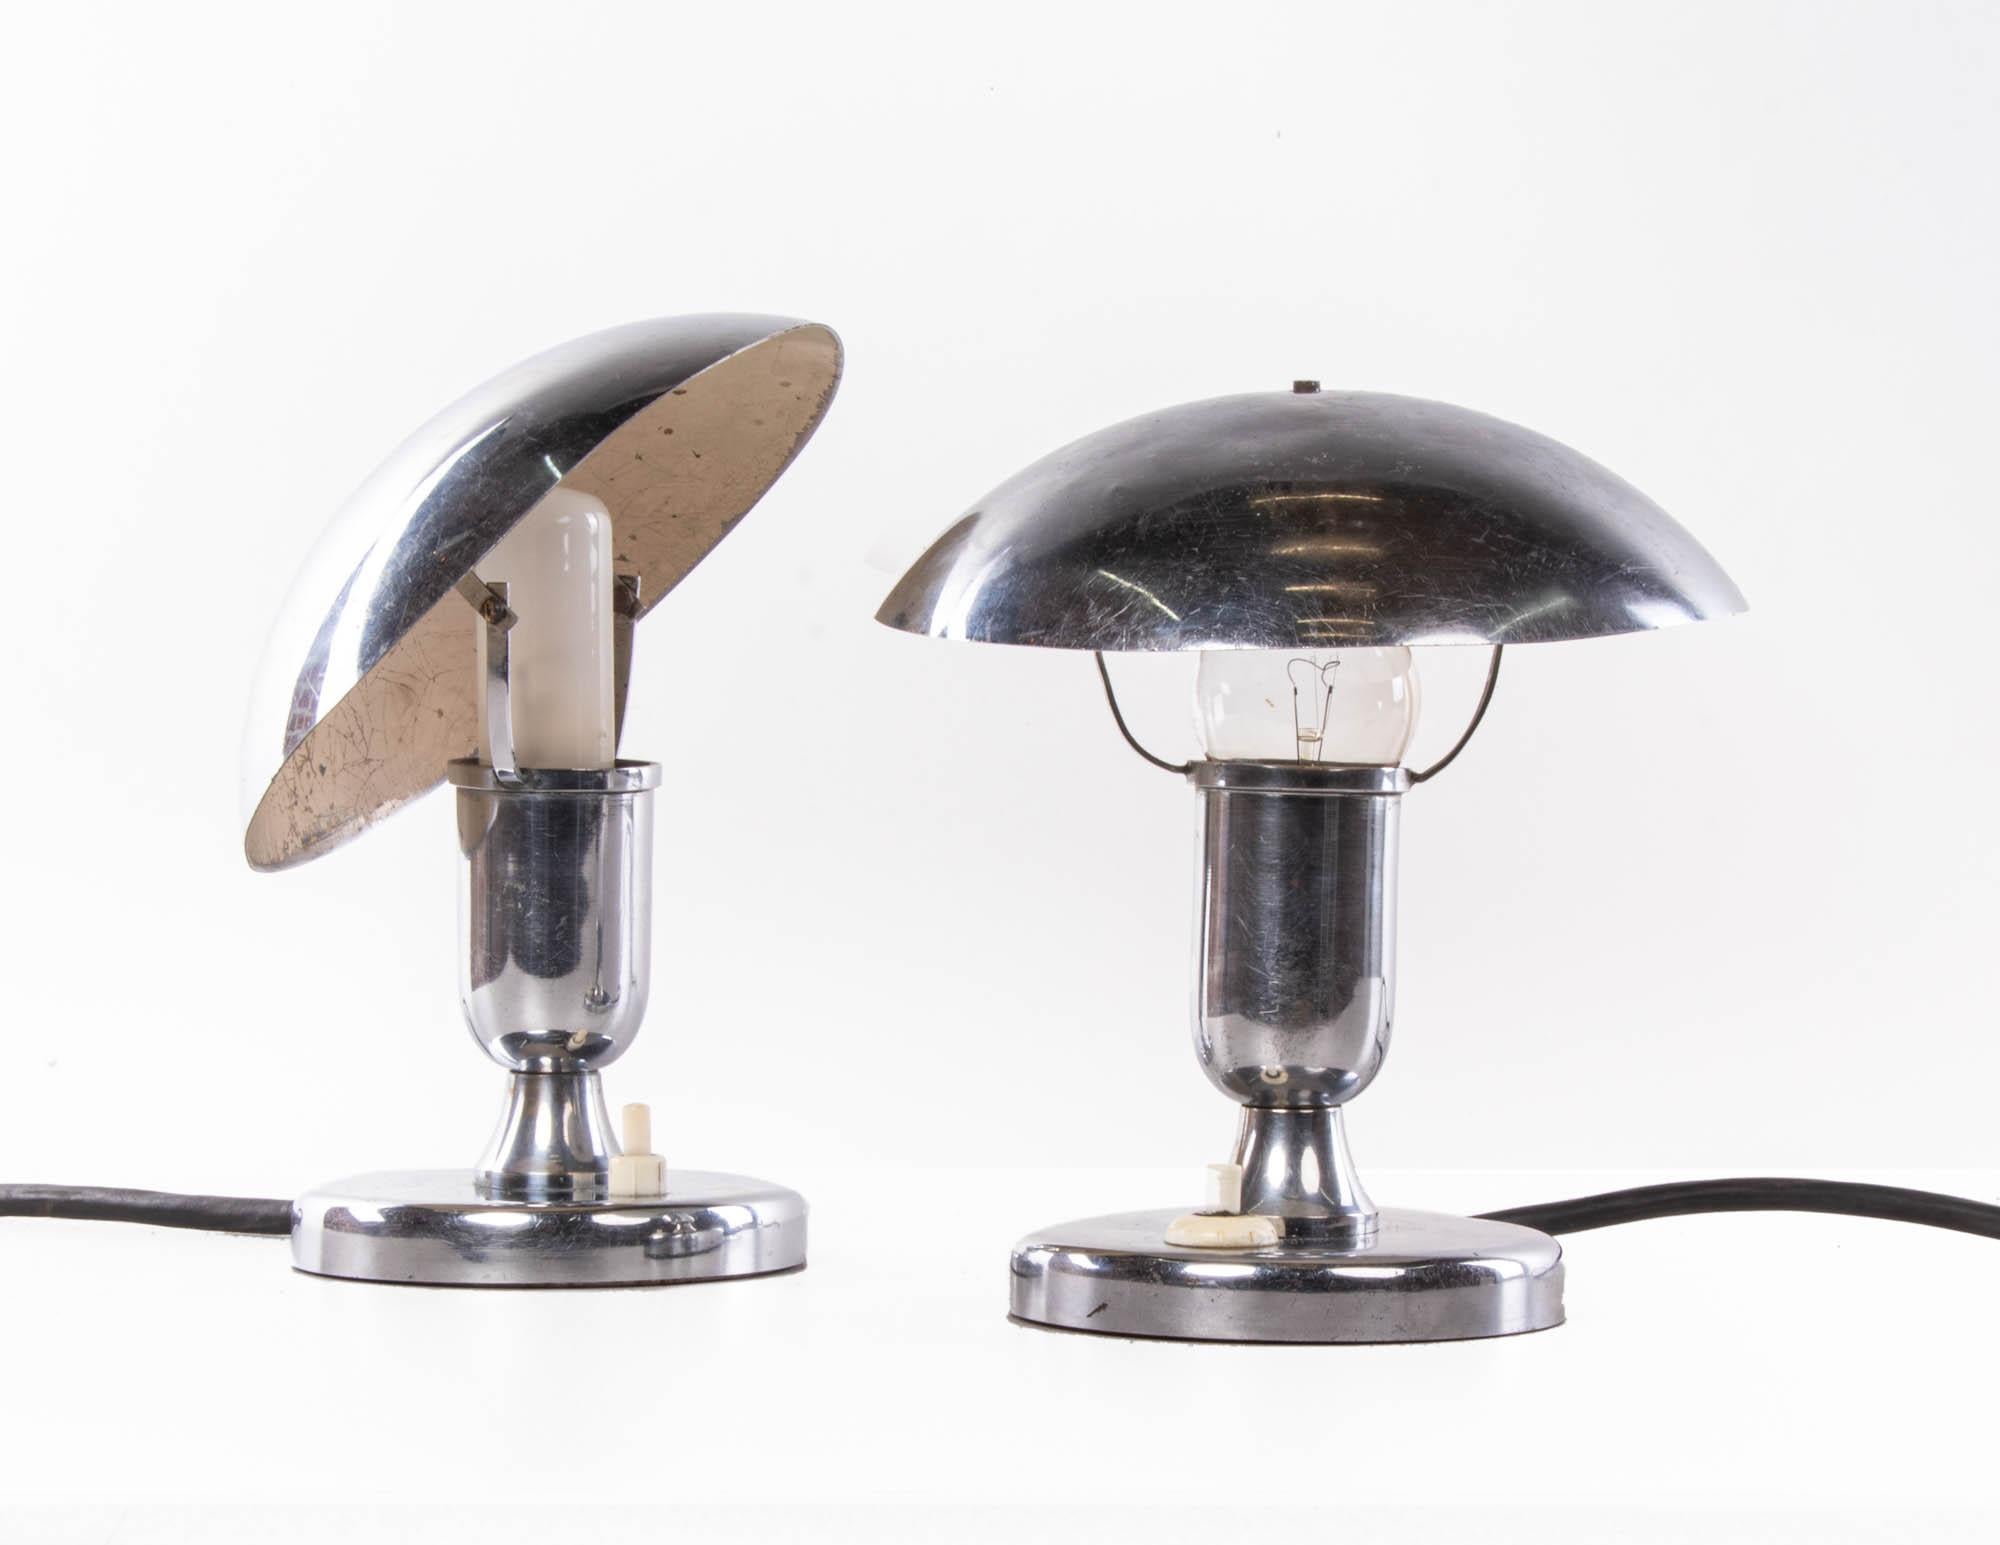 These elegant adjustable chromed table lamps are a great example of French lighting from the Art Deco / Bauhaus era. Quality, craftsmanship and functionalism in its finest form. 

Measures: diameter 6.7